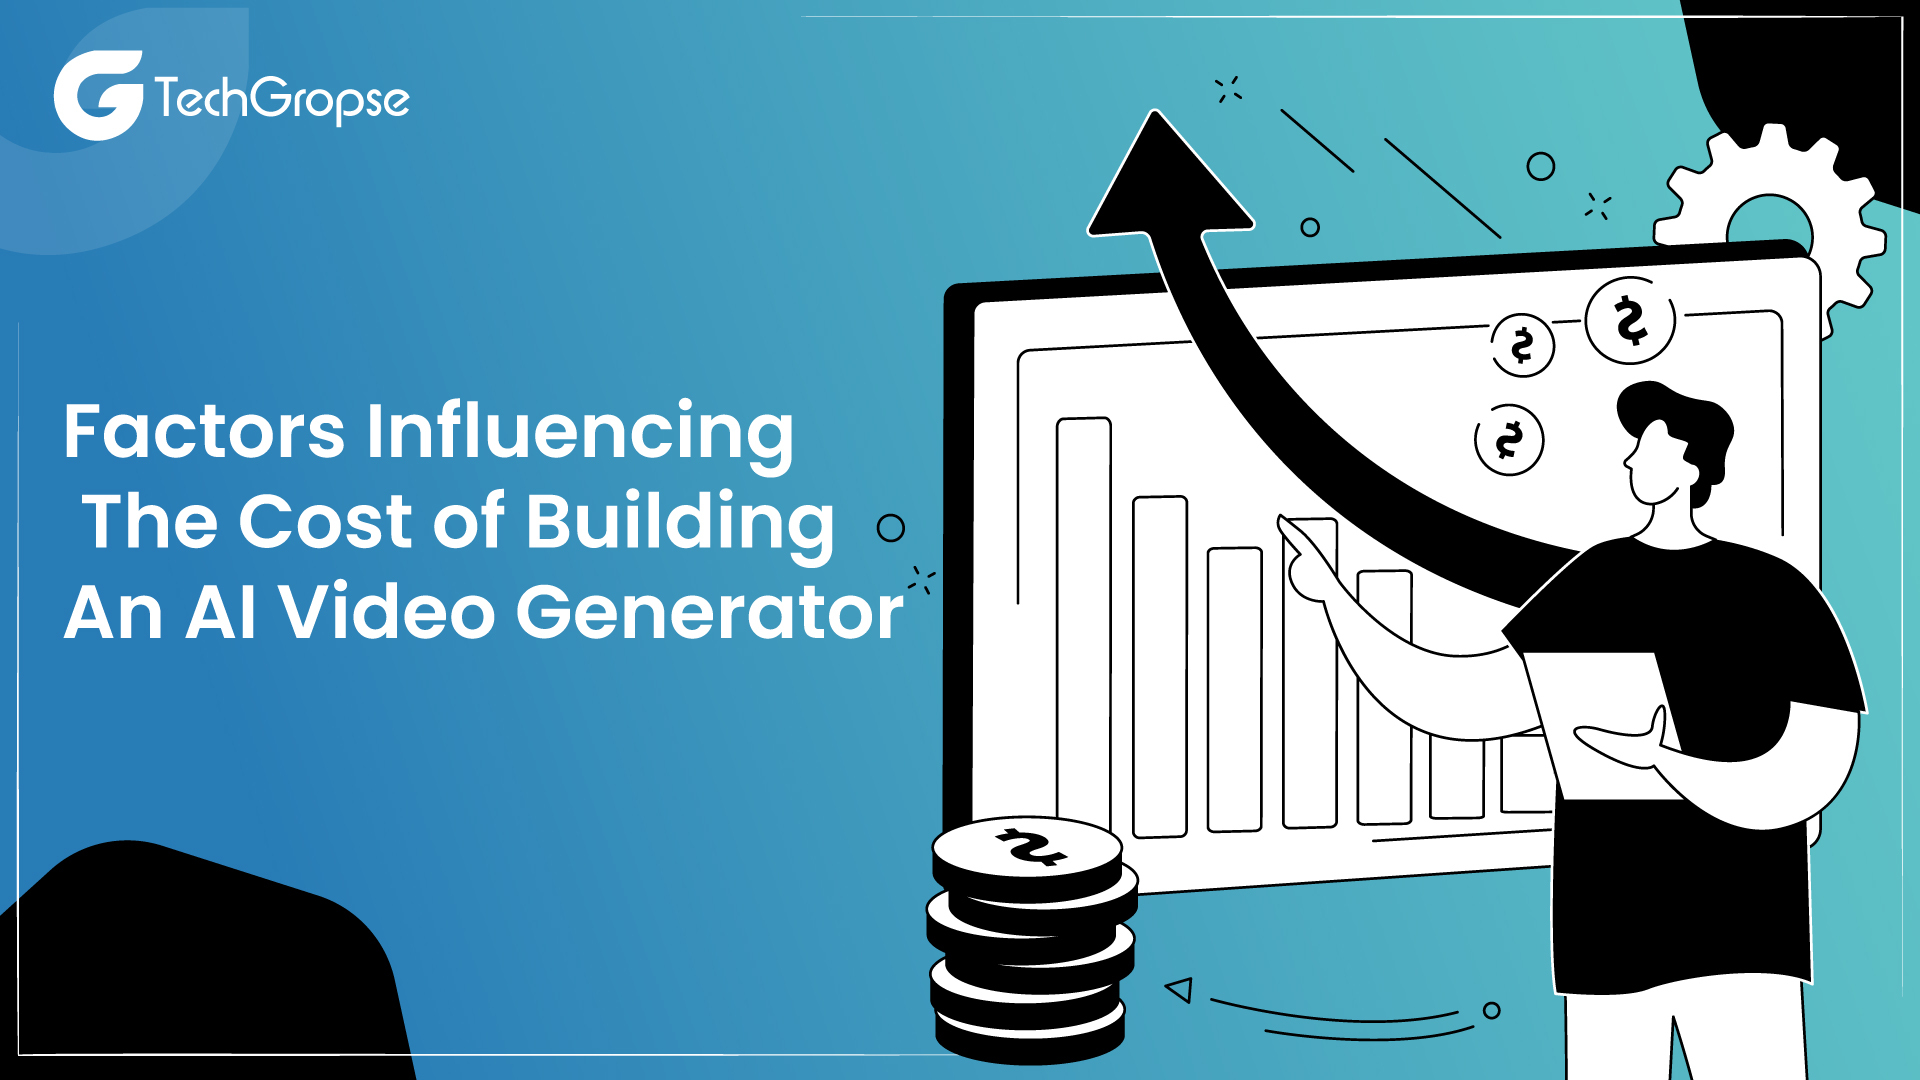 Factors Influencing The Cost of Building An AI Video Generator